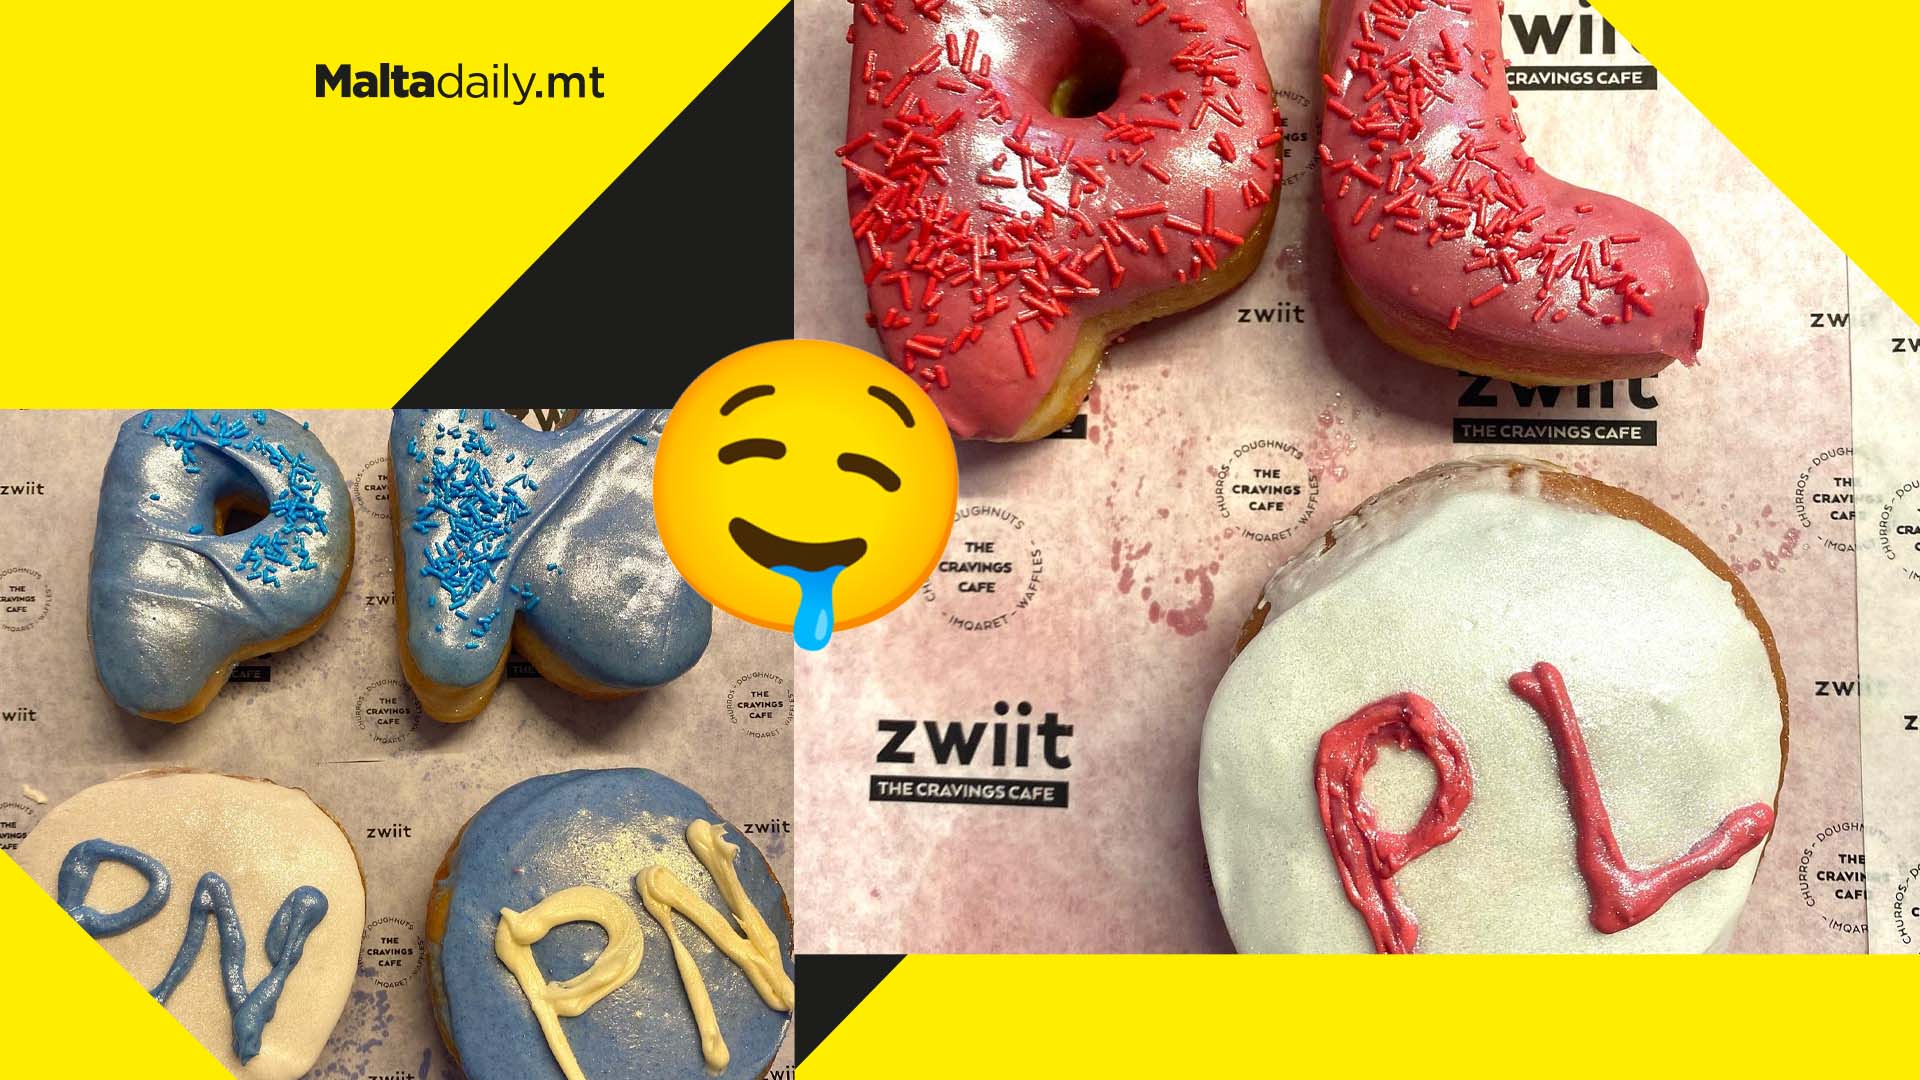 Zwiit Cravings Cafe serves up political donuts for Election Day